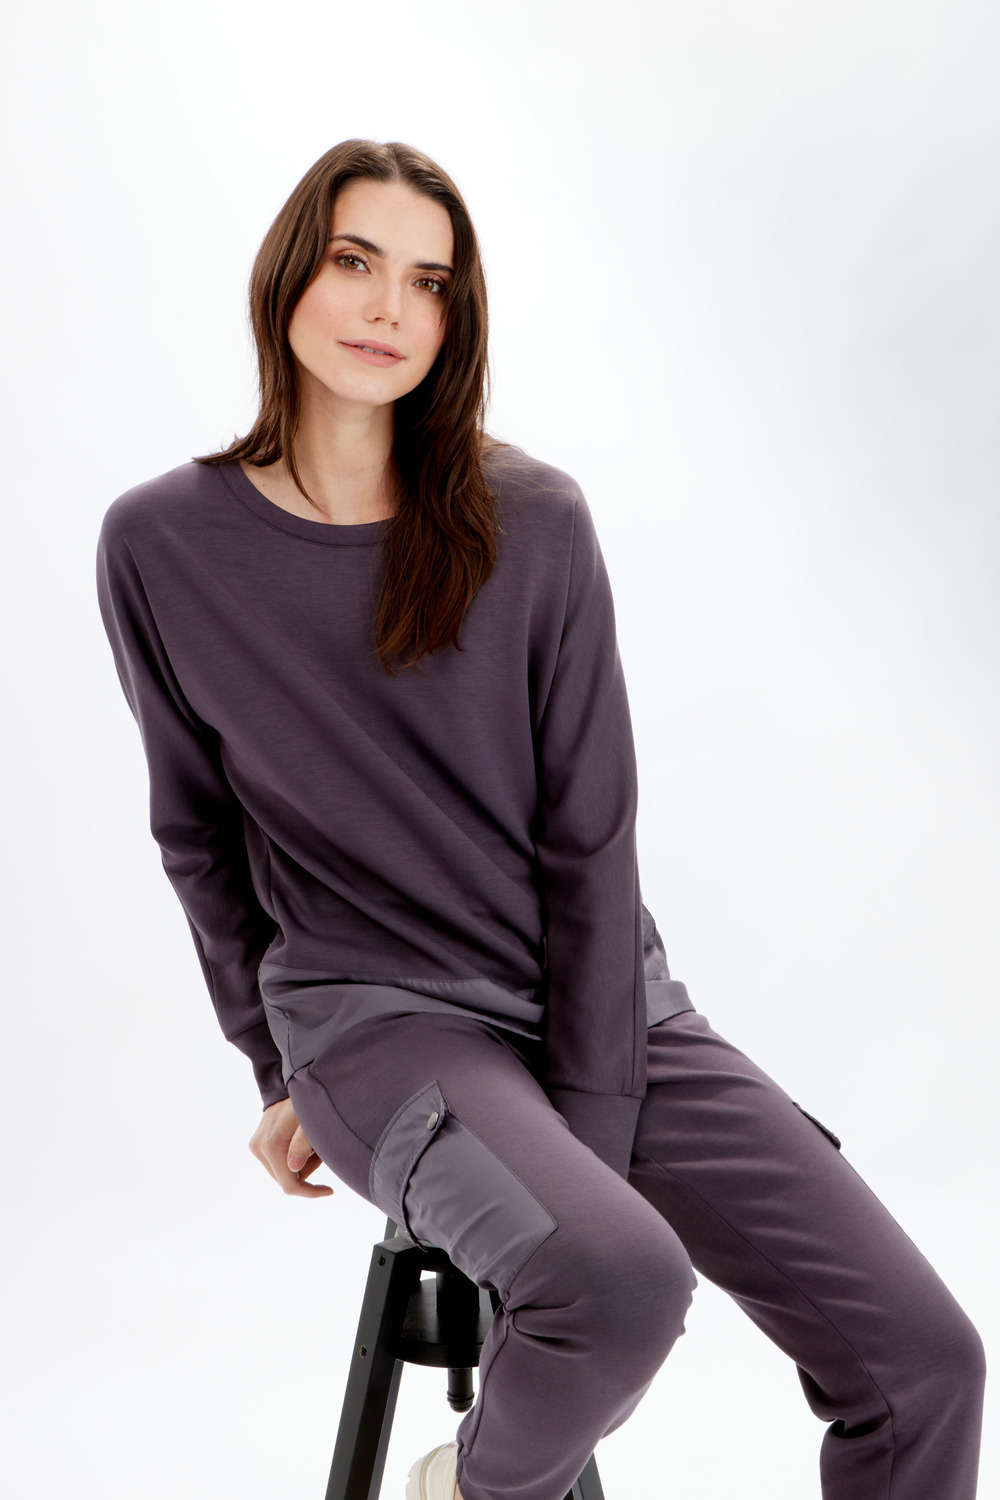 Two-Textured Sweater Style 710-08. Pewter